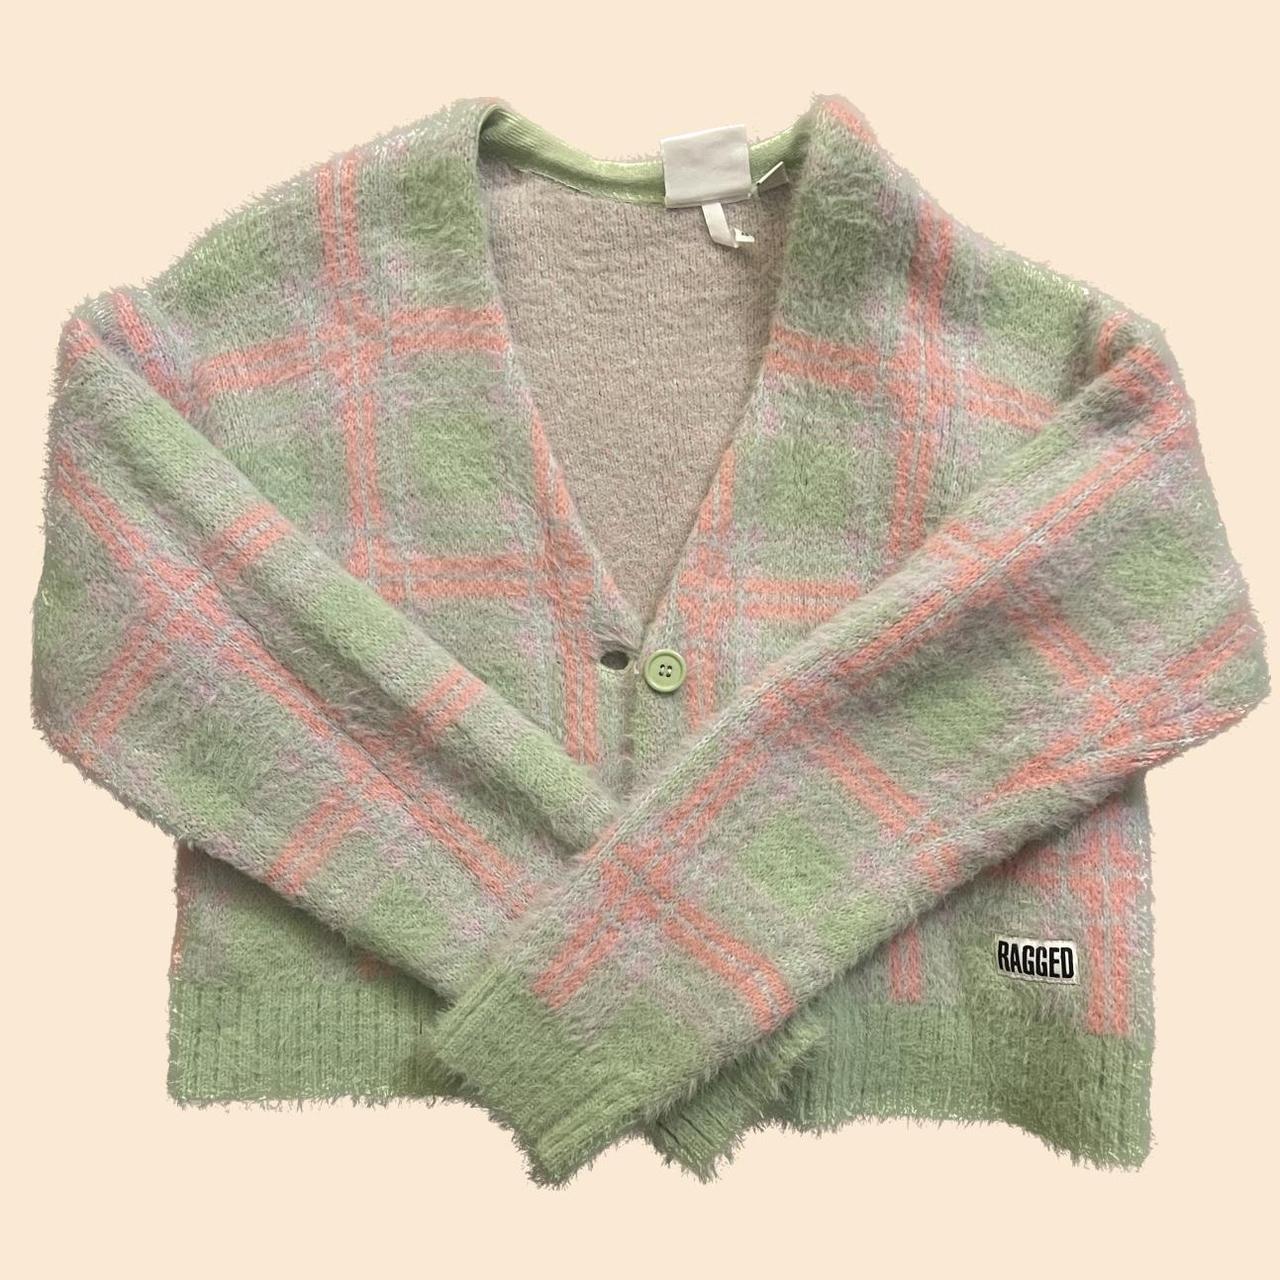 The Ragged Priest Women's Pink and Green Cardigan